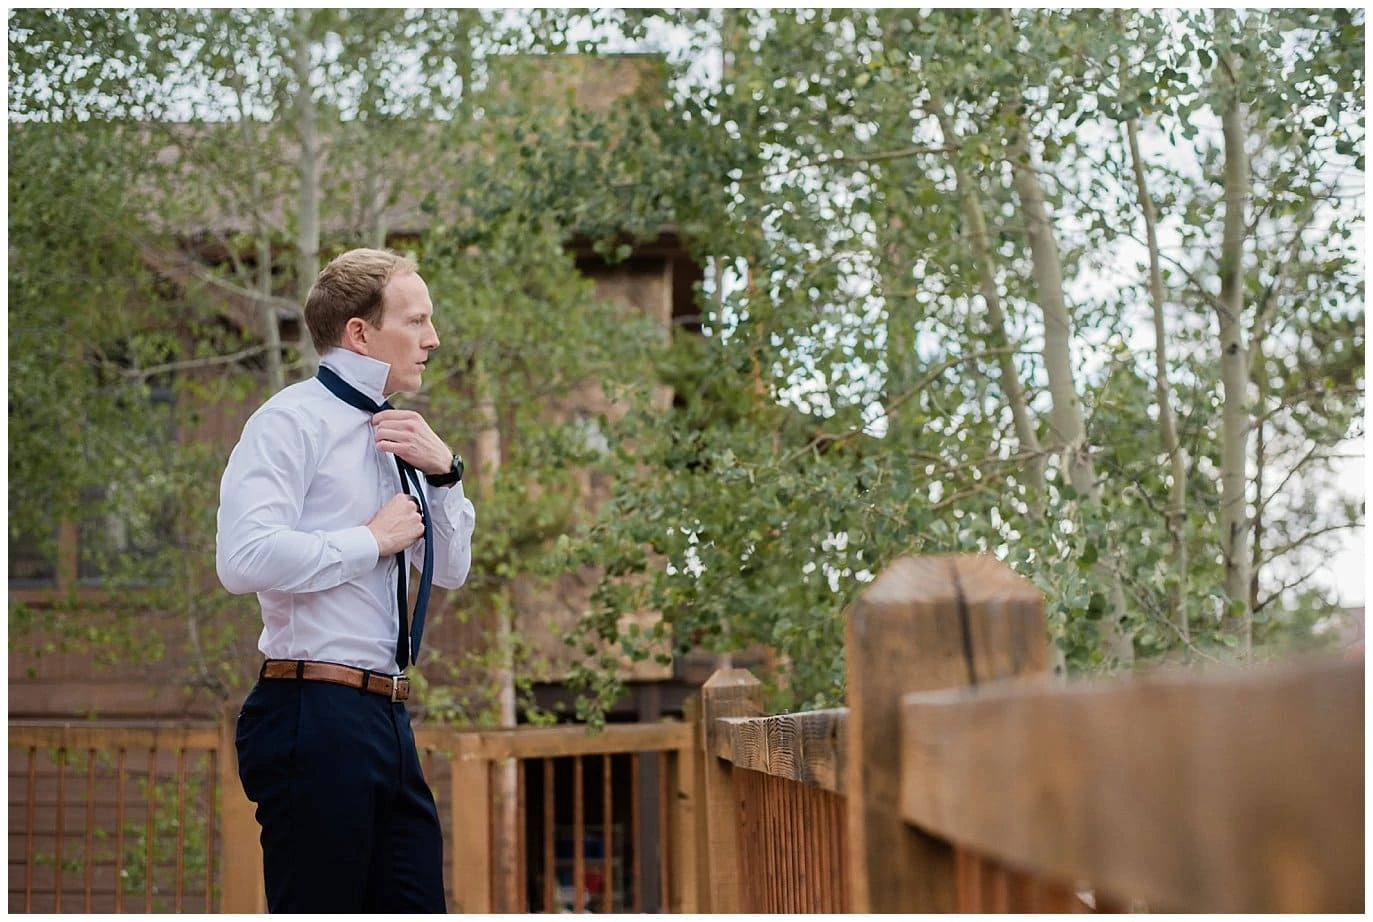 groom getting ready on deck of private home at Arapahoe Basin Black Mountain Lodge Wedding by Keystone Wedding Photographer Jennie Crate